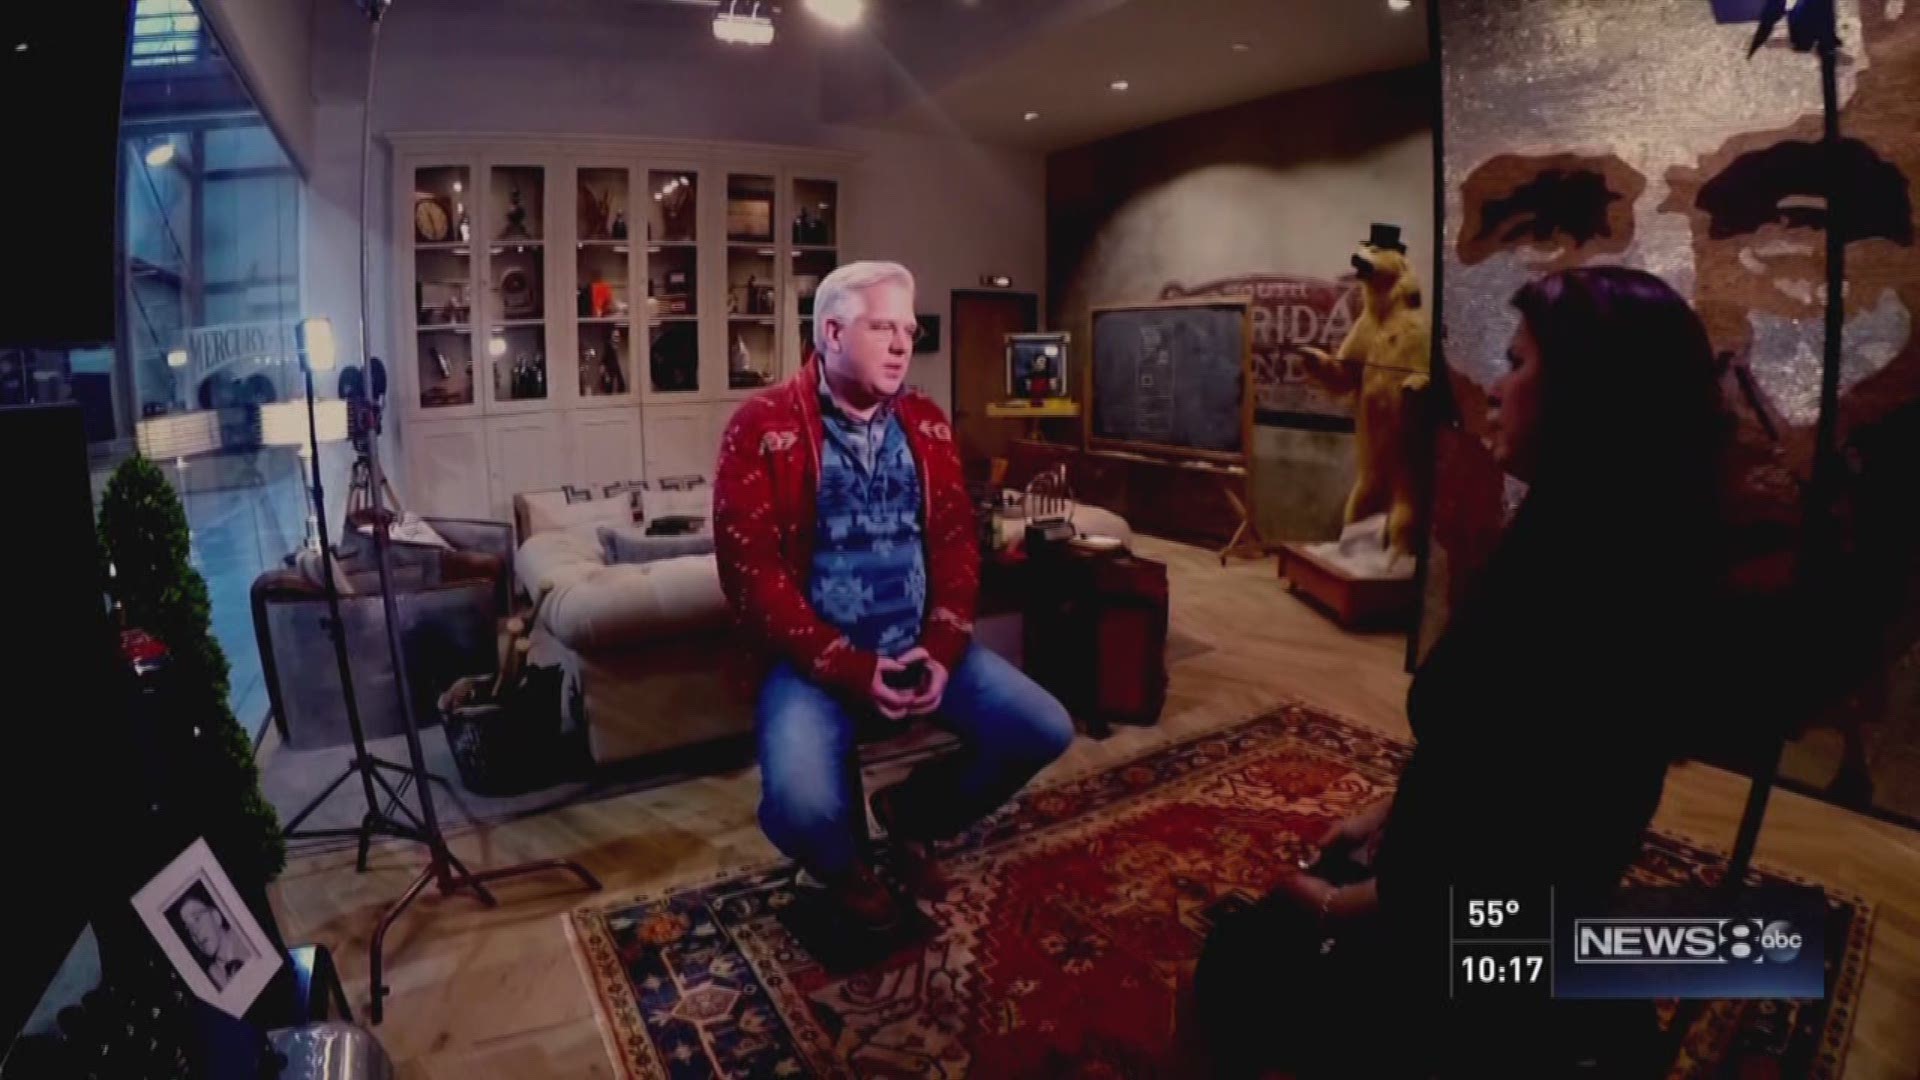 NEWS 8 EXCLUSIVE: Glenn Beck opens up to News 8's Rebecca Lopez about his abusive past.